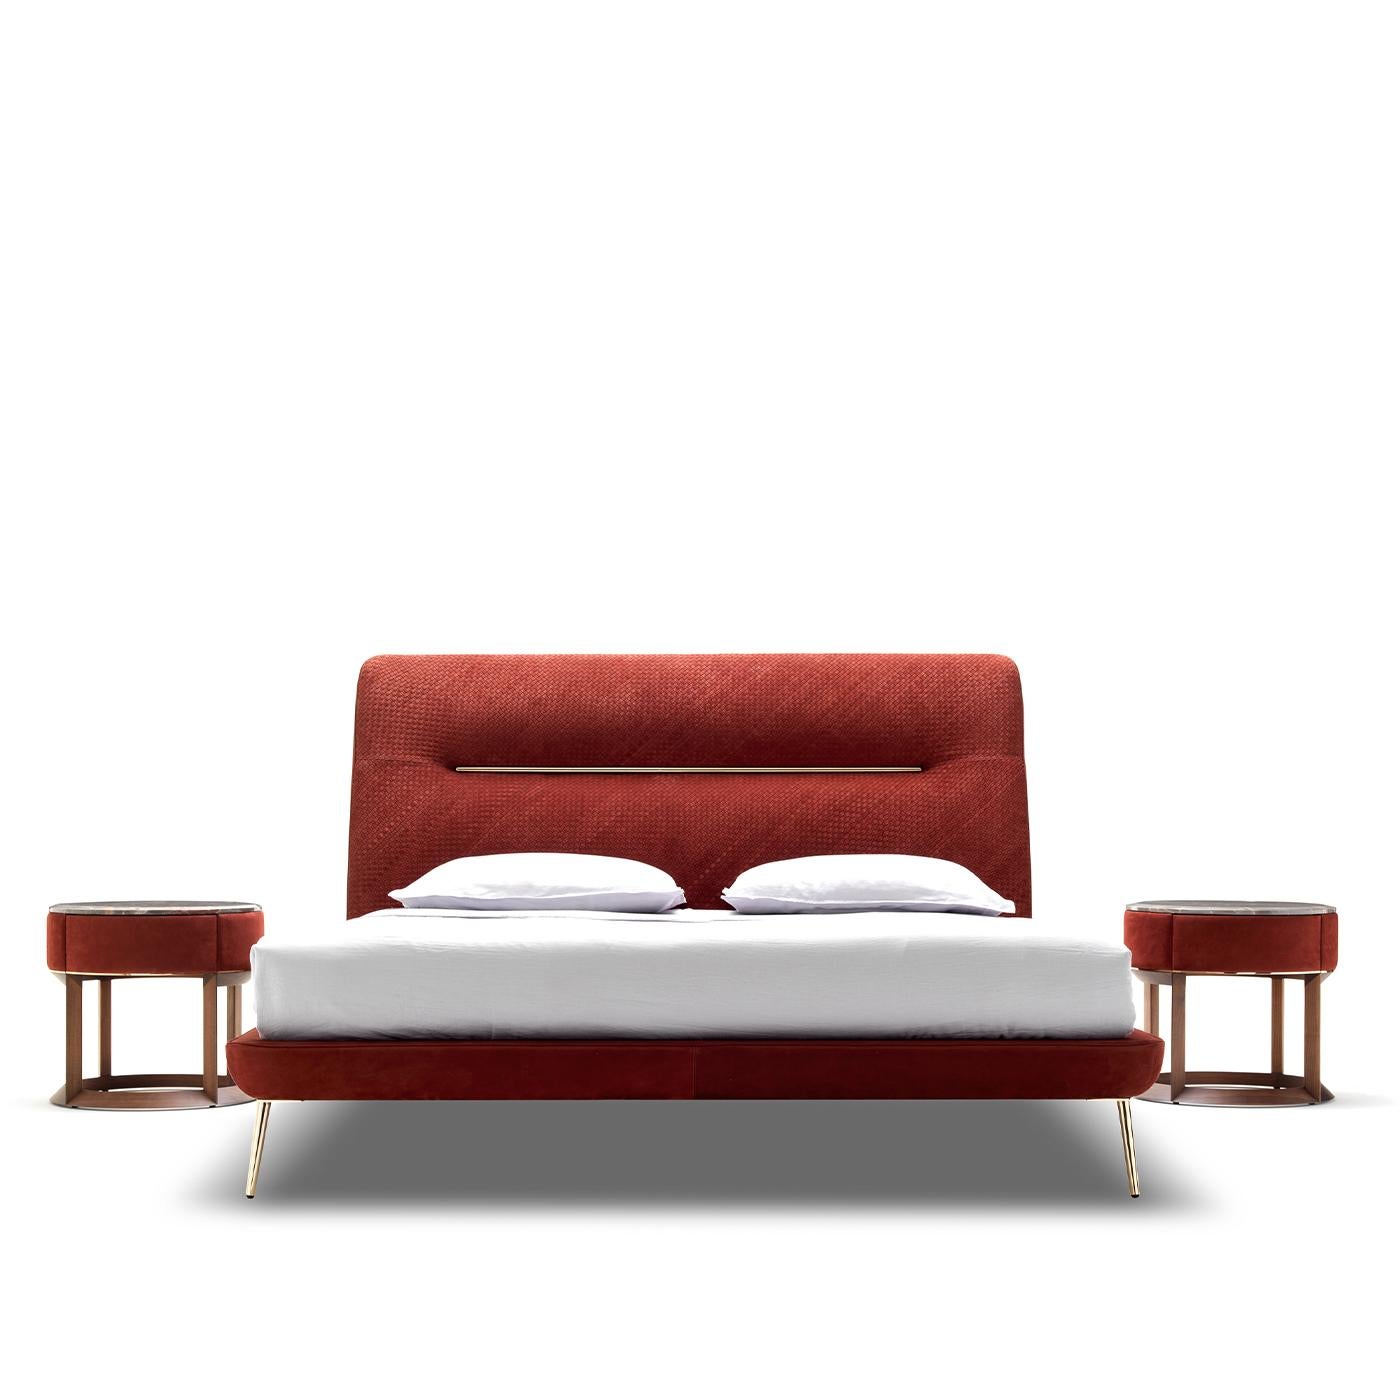 This bed is a one of a kind piece of the Vanity collection. Showcasing an elegant and refined design of timeless flair, its exquisite frame boasts a splendid burgundy Grassé leather upholstery, enriched with gold-finished metal details. Softly